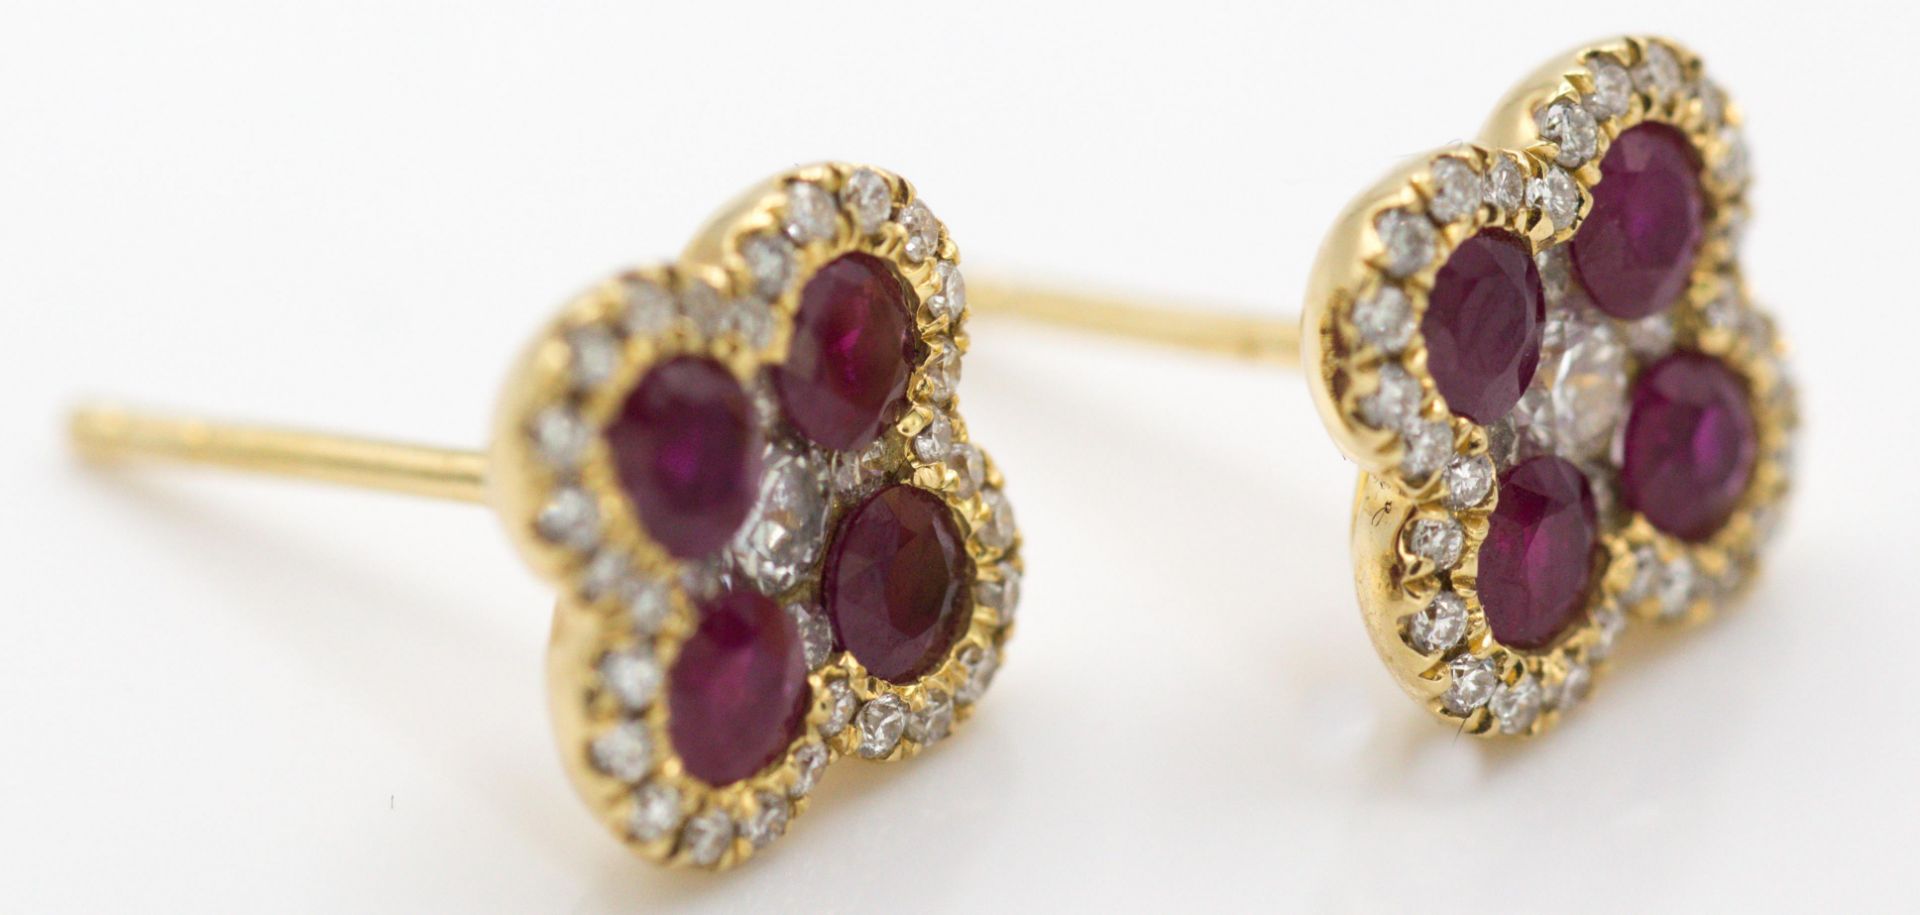 Pair of 18ct Yellow Gold Ruby & Diamond Clover Leaf Earrings - Image 2 of 3